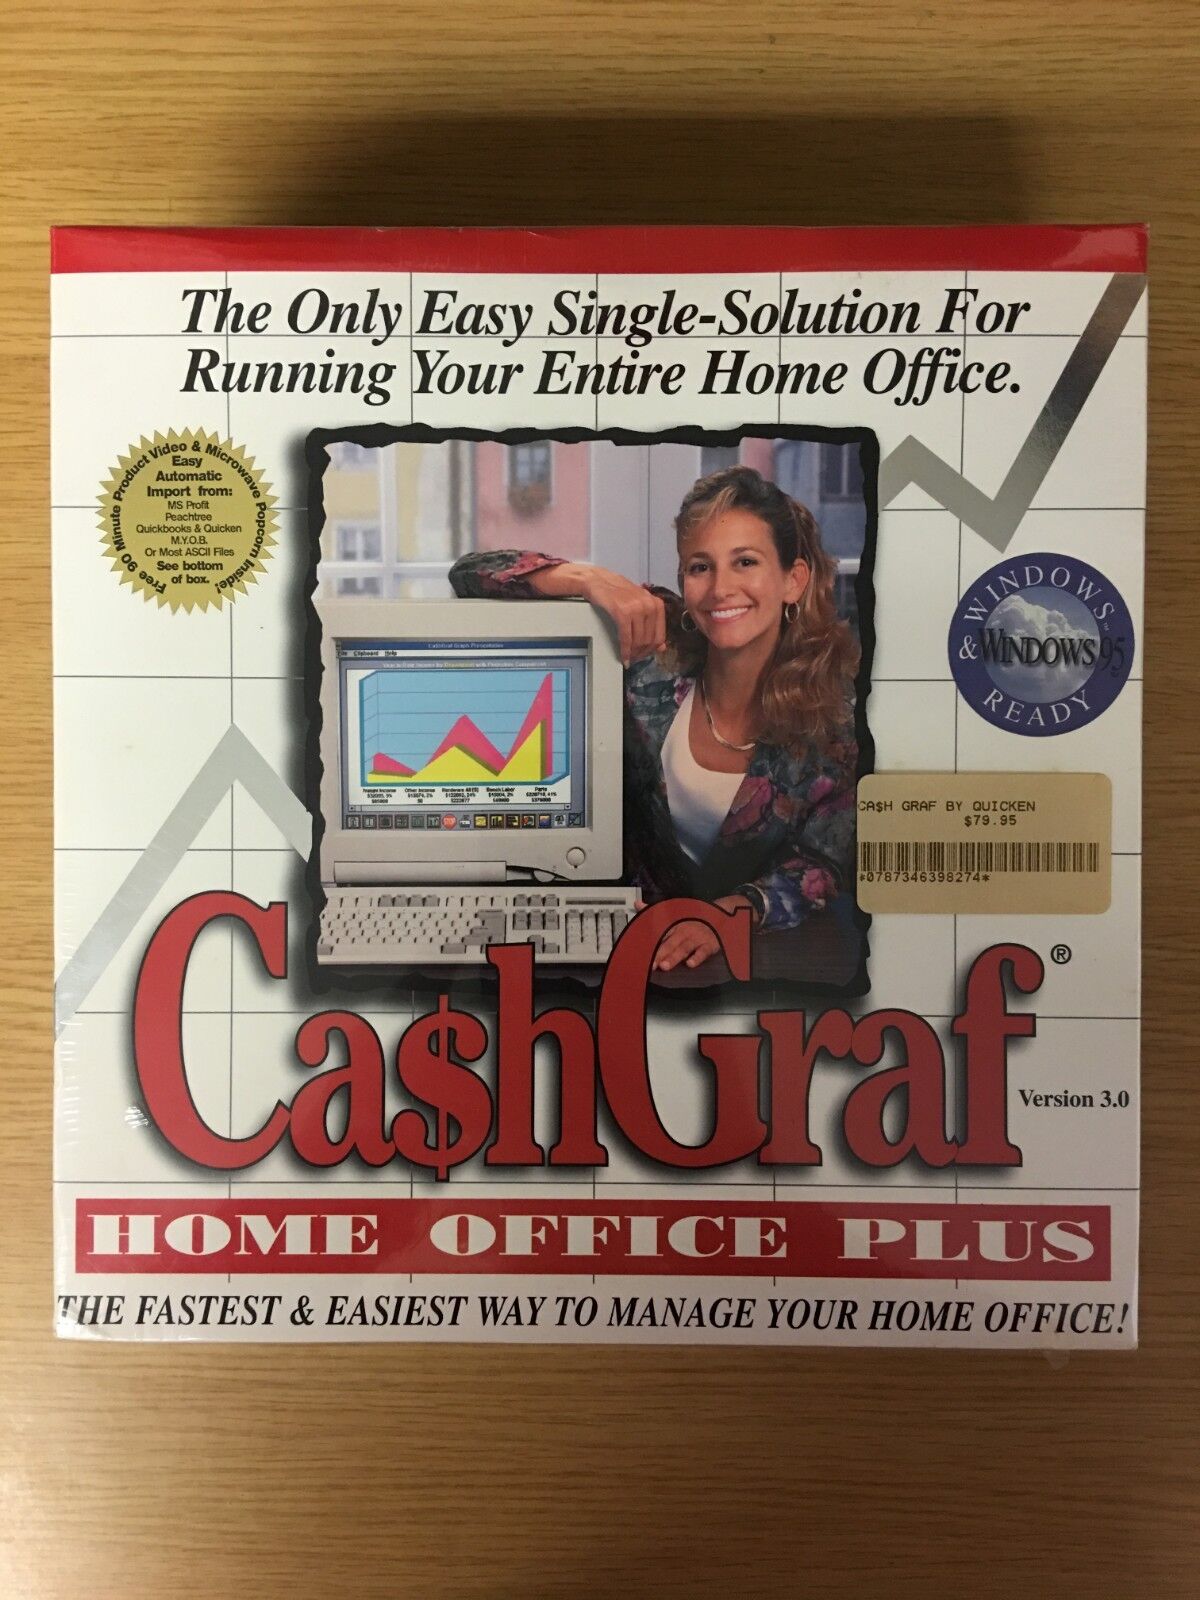 CashGraf® Home Office Plus 3.0 (1990\'s) Includes Video & Microwave Popcorn